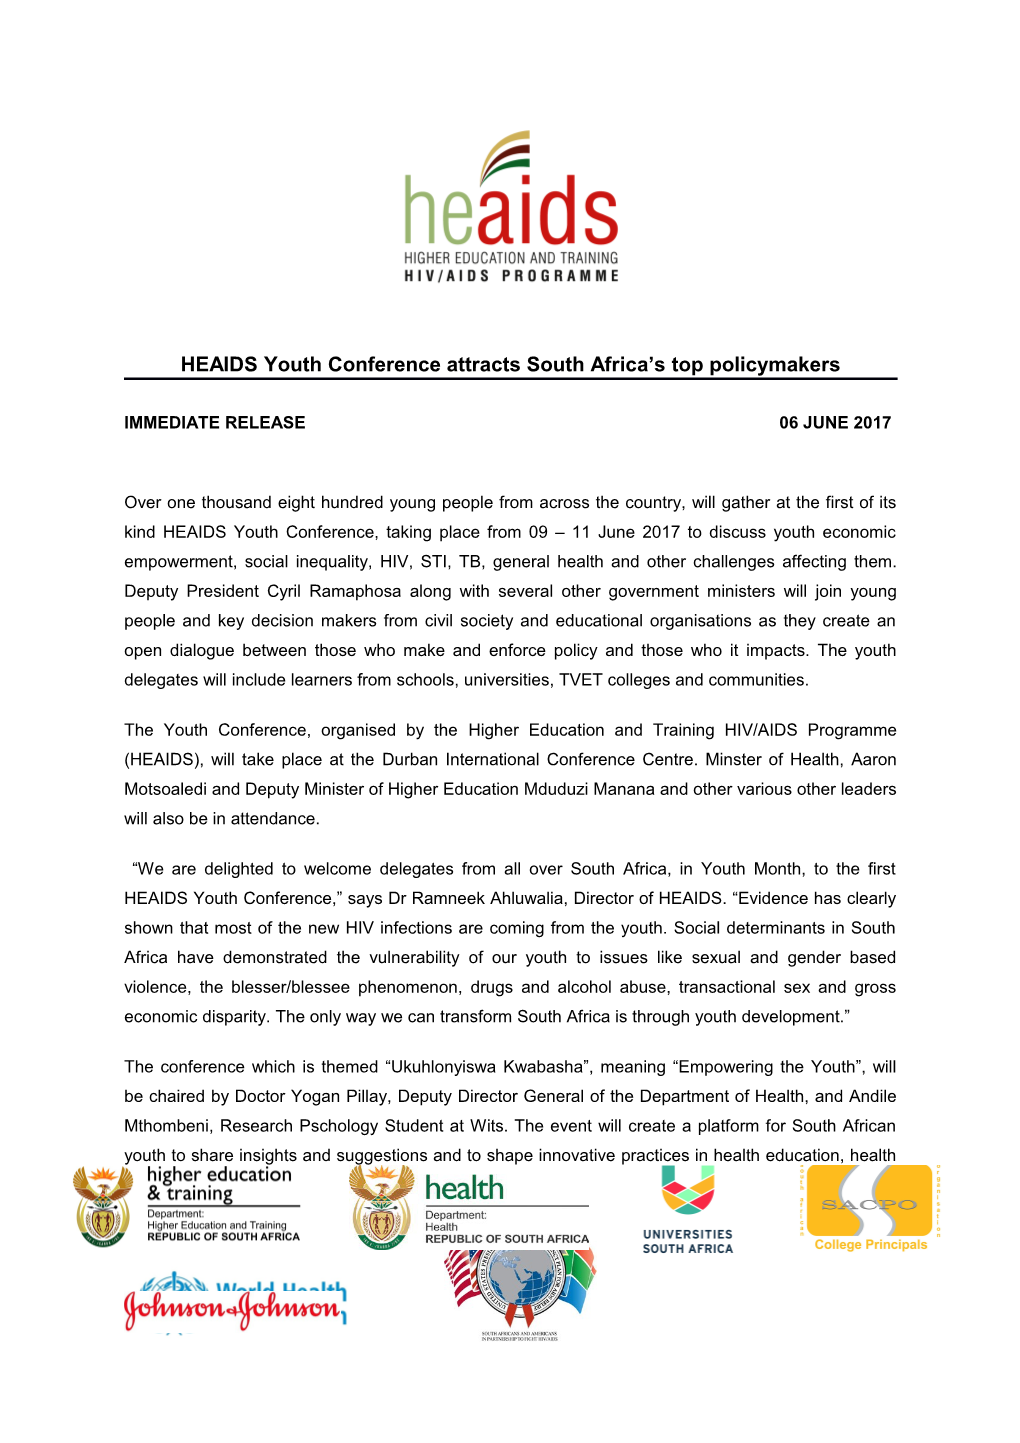 HEAIDS Youth Conference Attracts South Africa S Top Policymakers